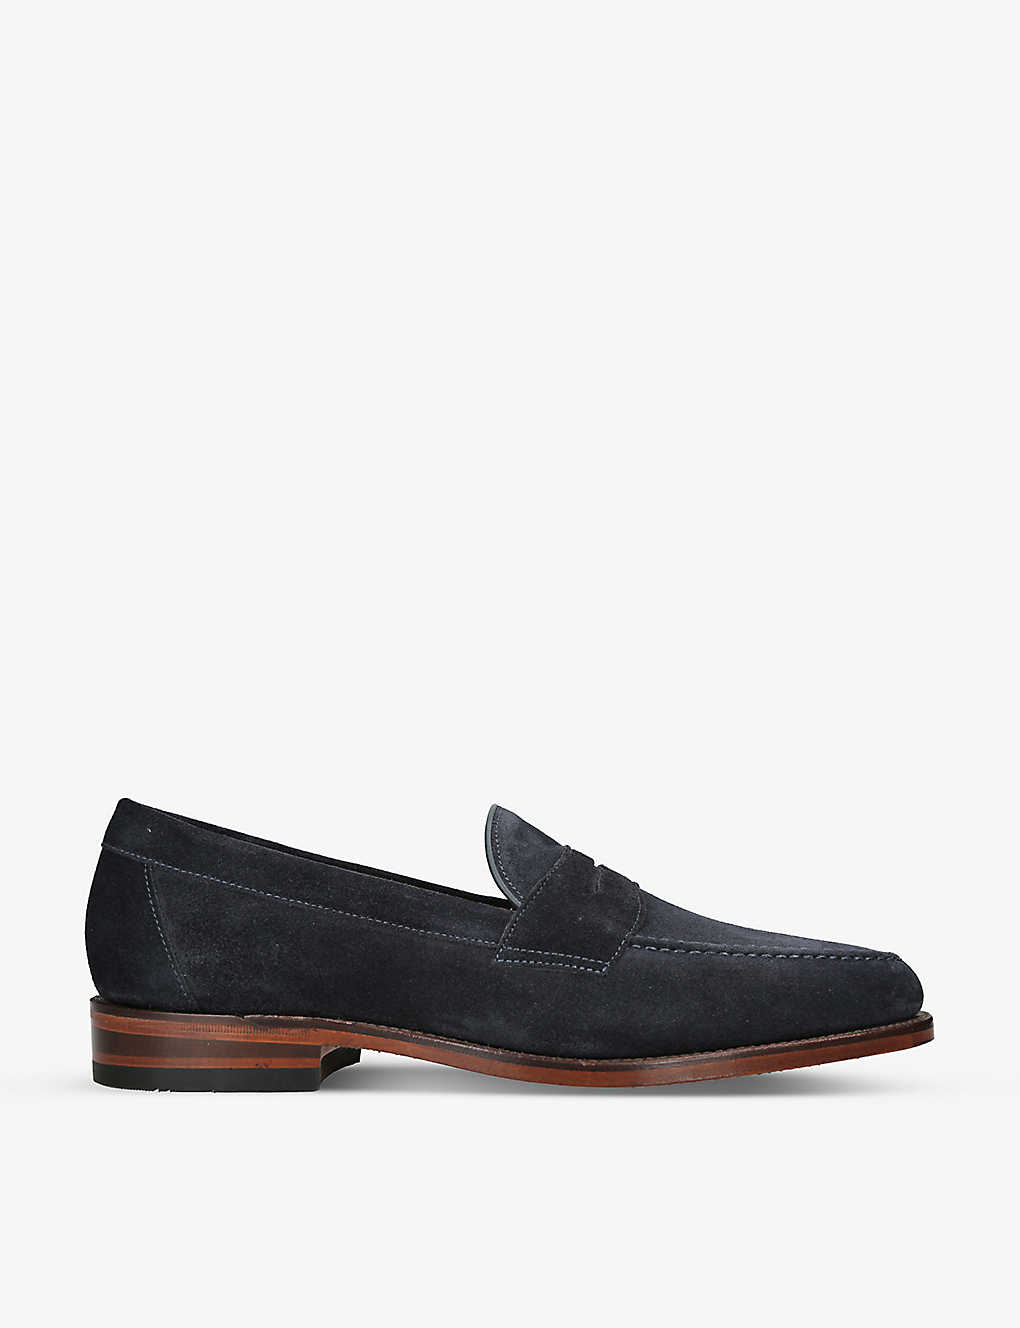 Loake Mens Navy Imperial Strap Suede Loafers